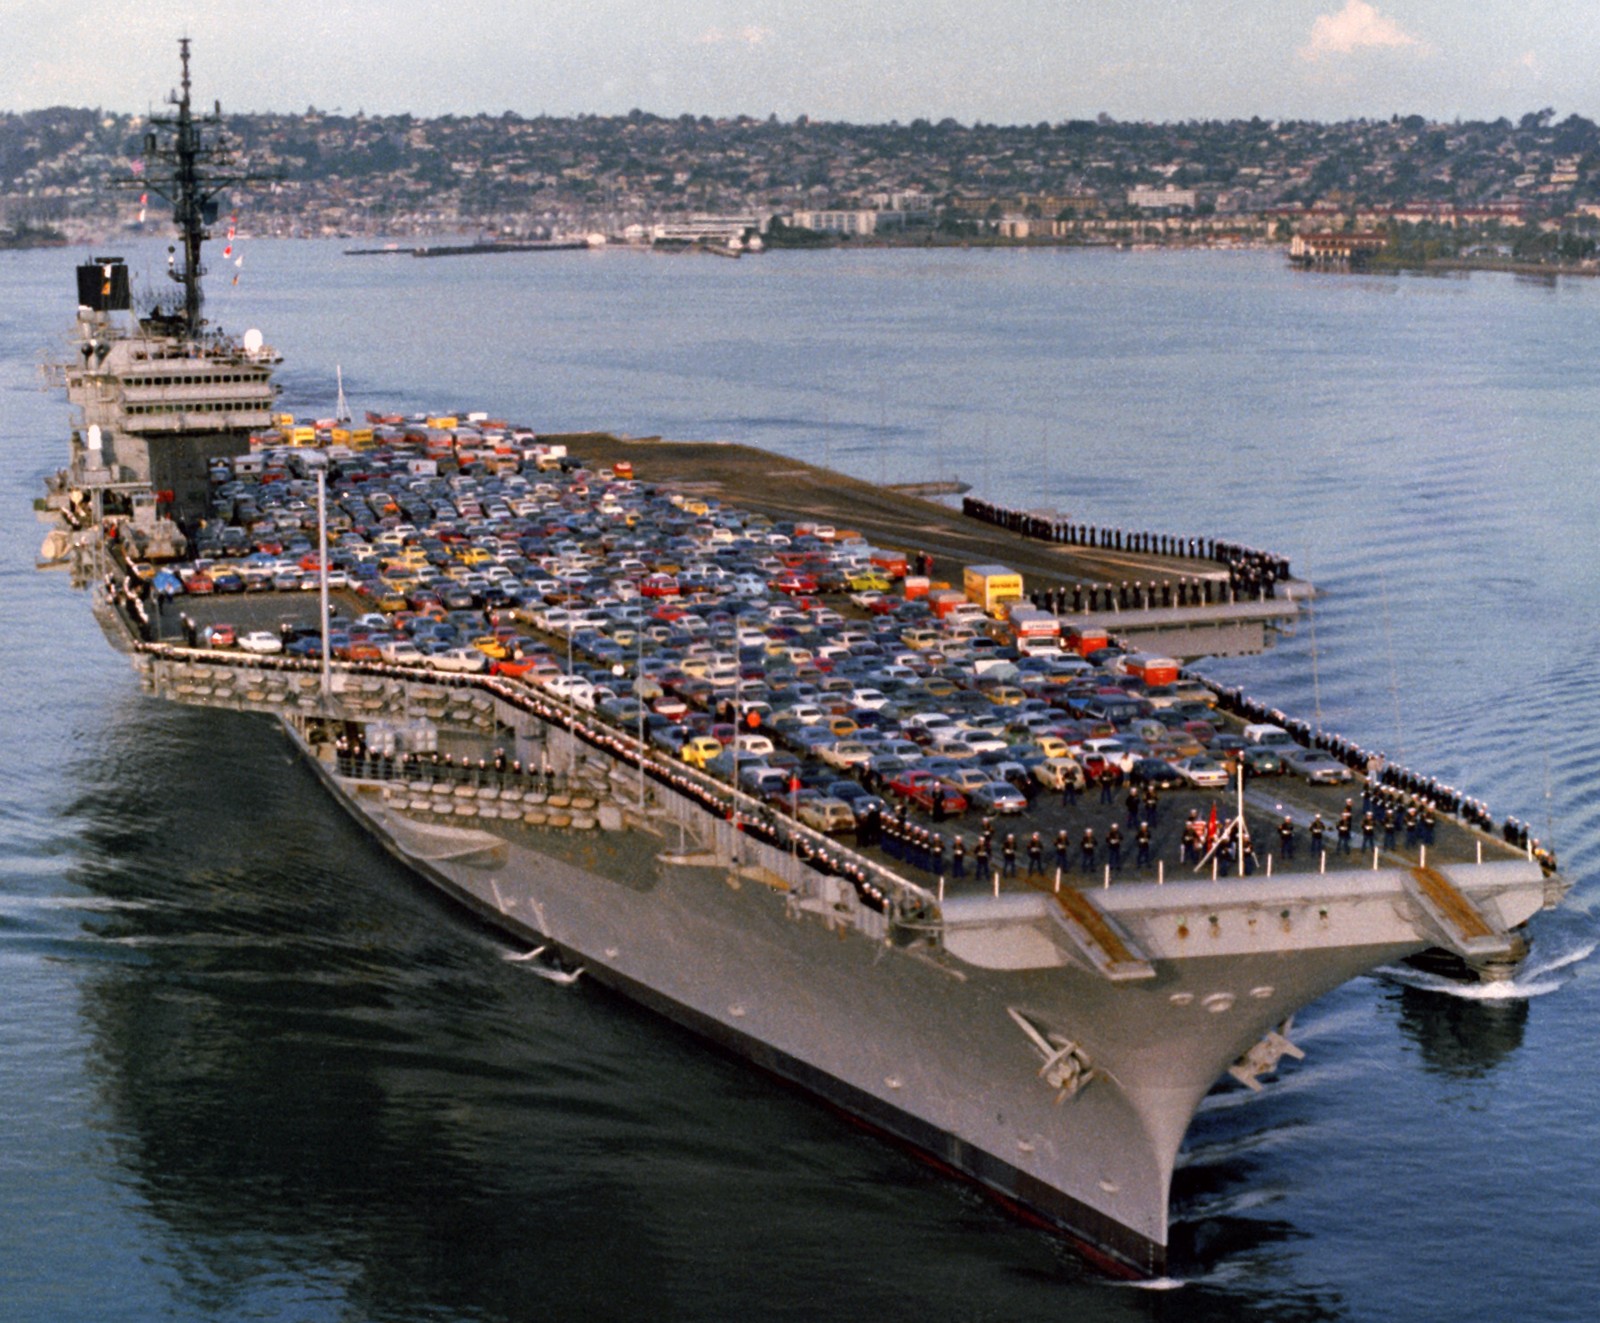 cv-63 uss kitty hawk aircraft carrier 320 private cars vehicles onboard